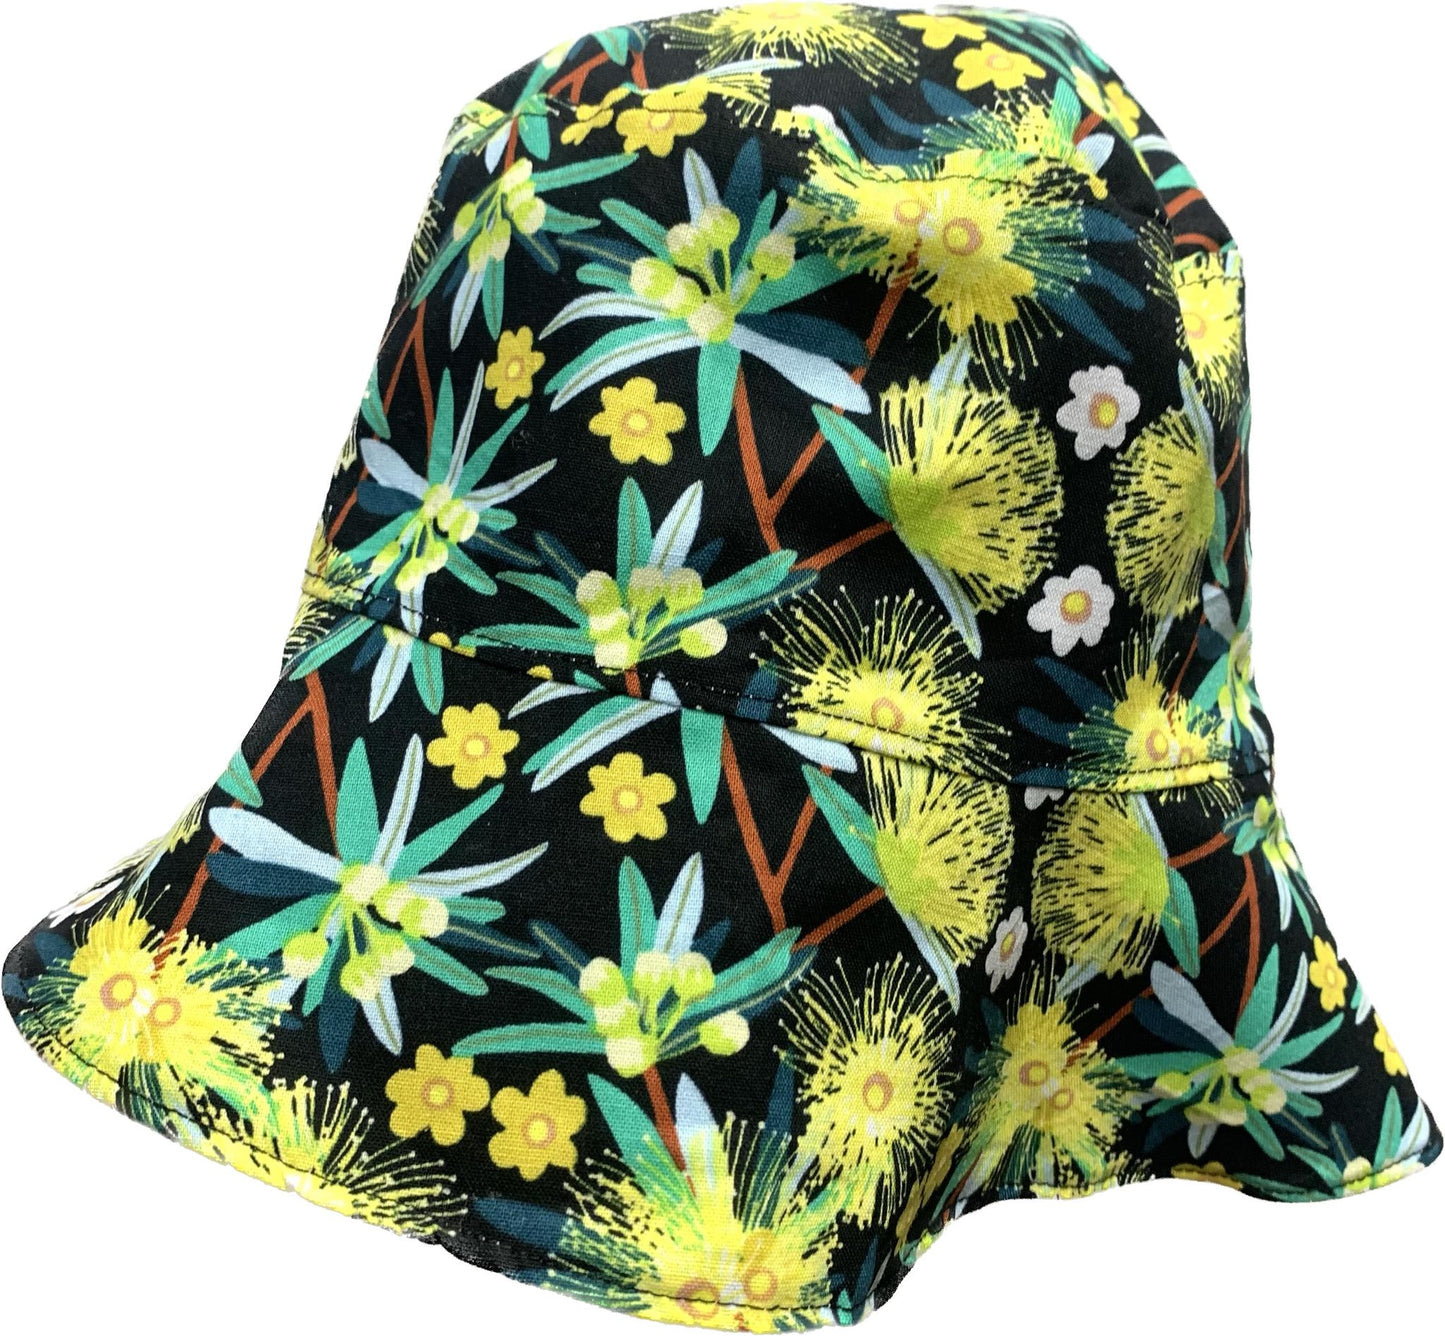 Teacups n Quilts- Yellow Gum Ponytail Fabric Hat- Adult Size